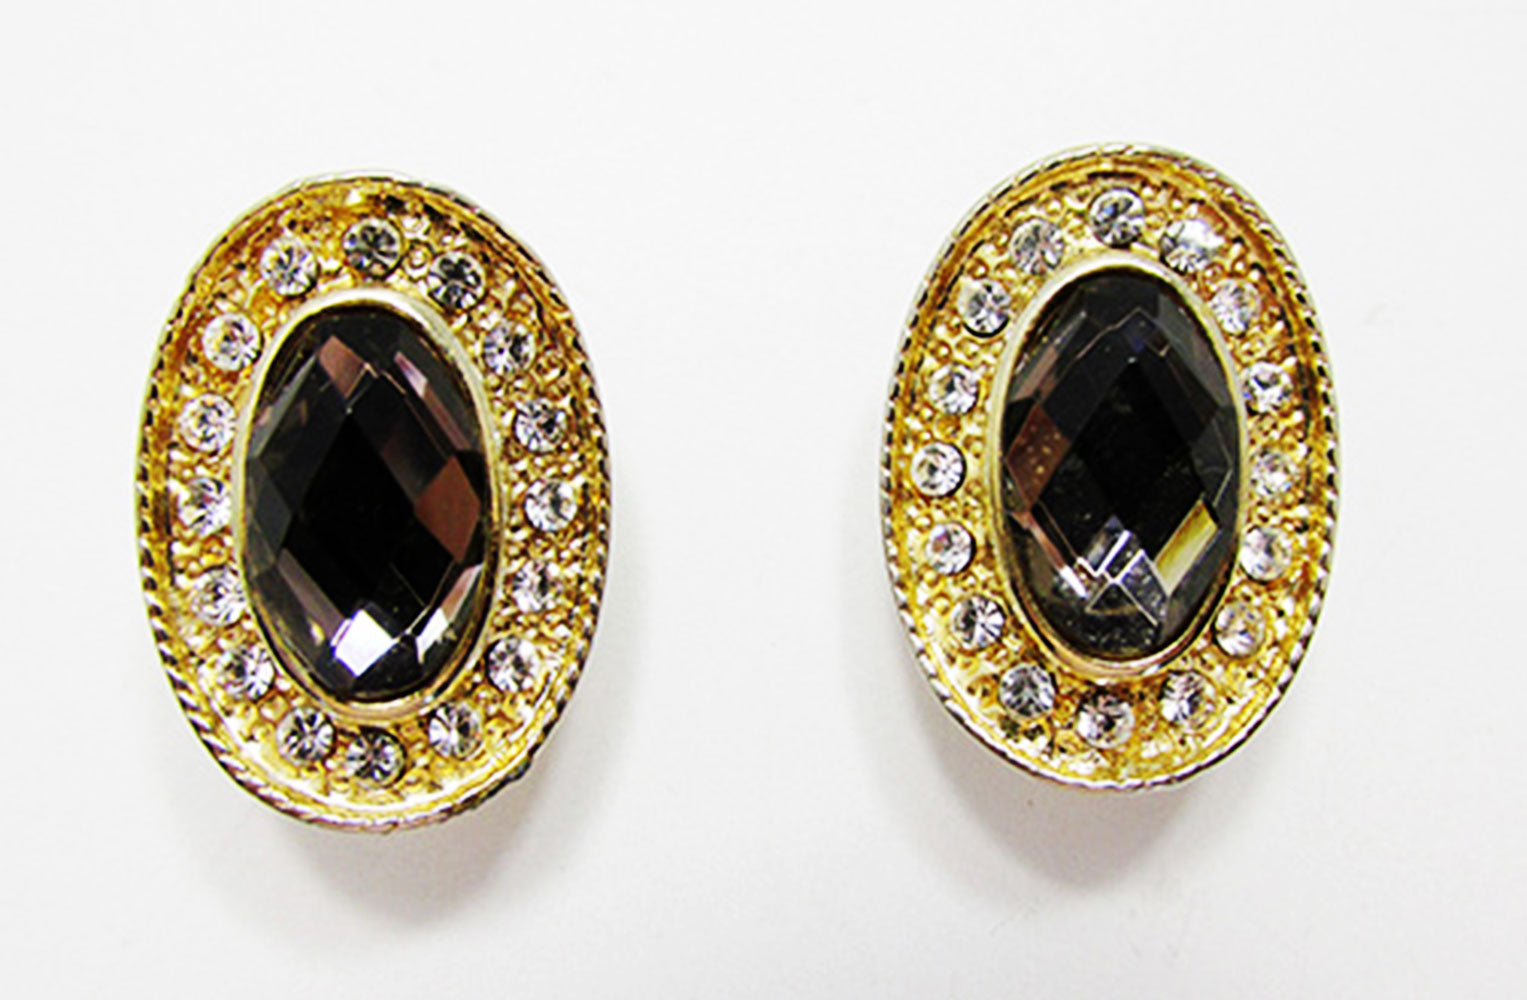 Vintage 1970s Jewelry Contemporary Style Diamante Clip Earrings - Front